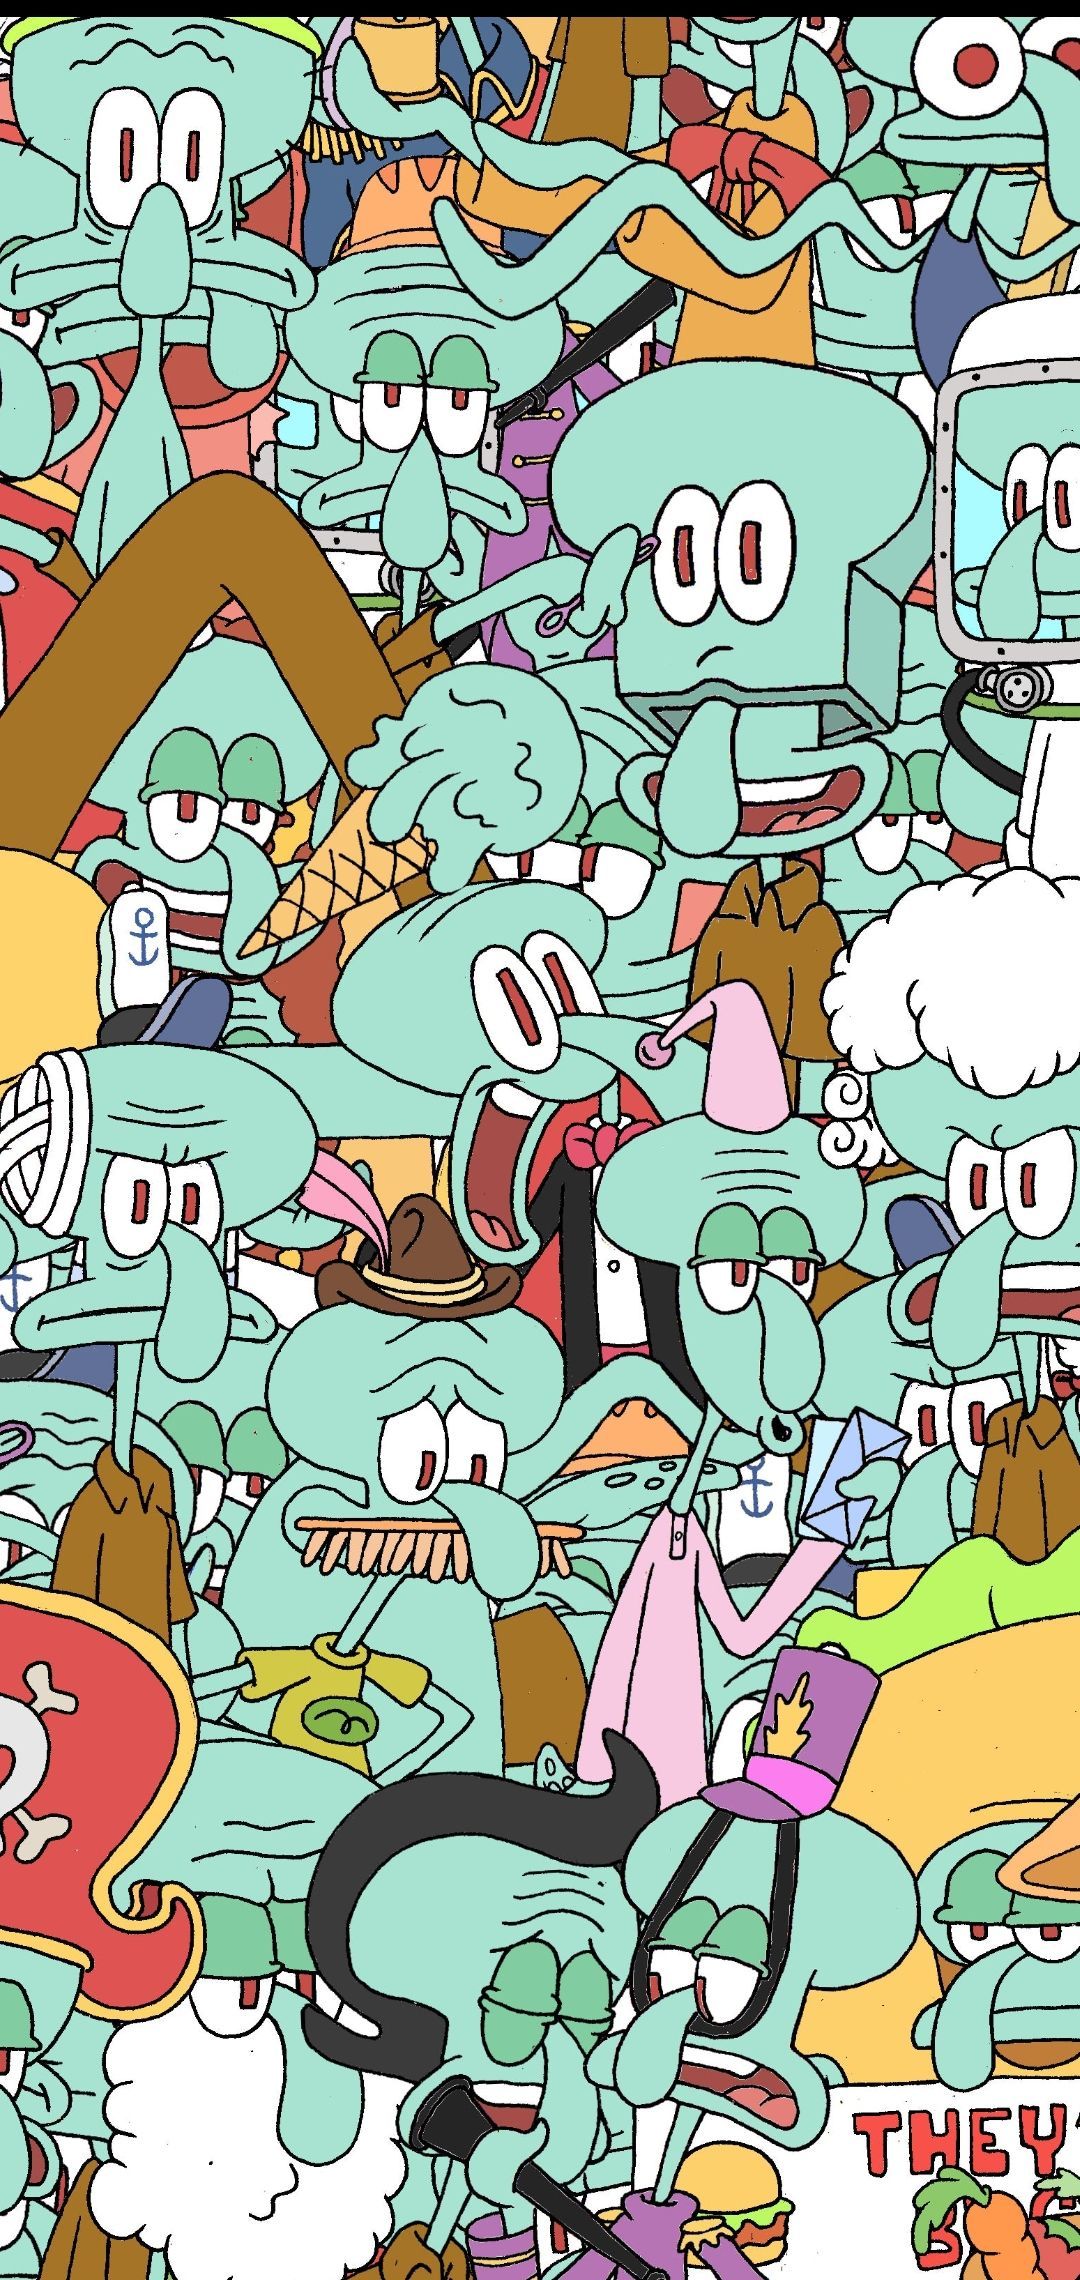 A poster with many different cartoon characters - Squidward